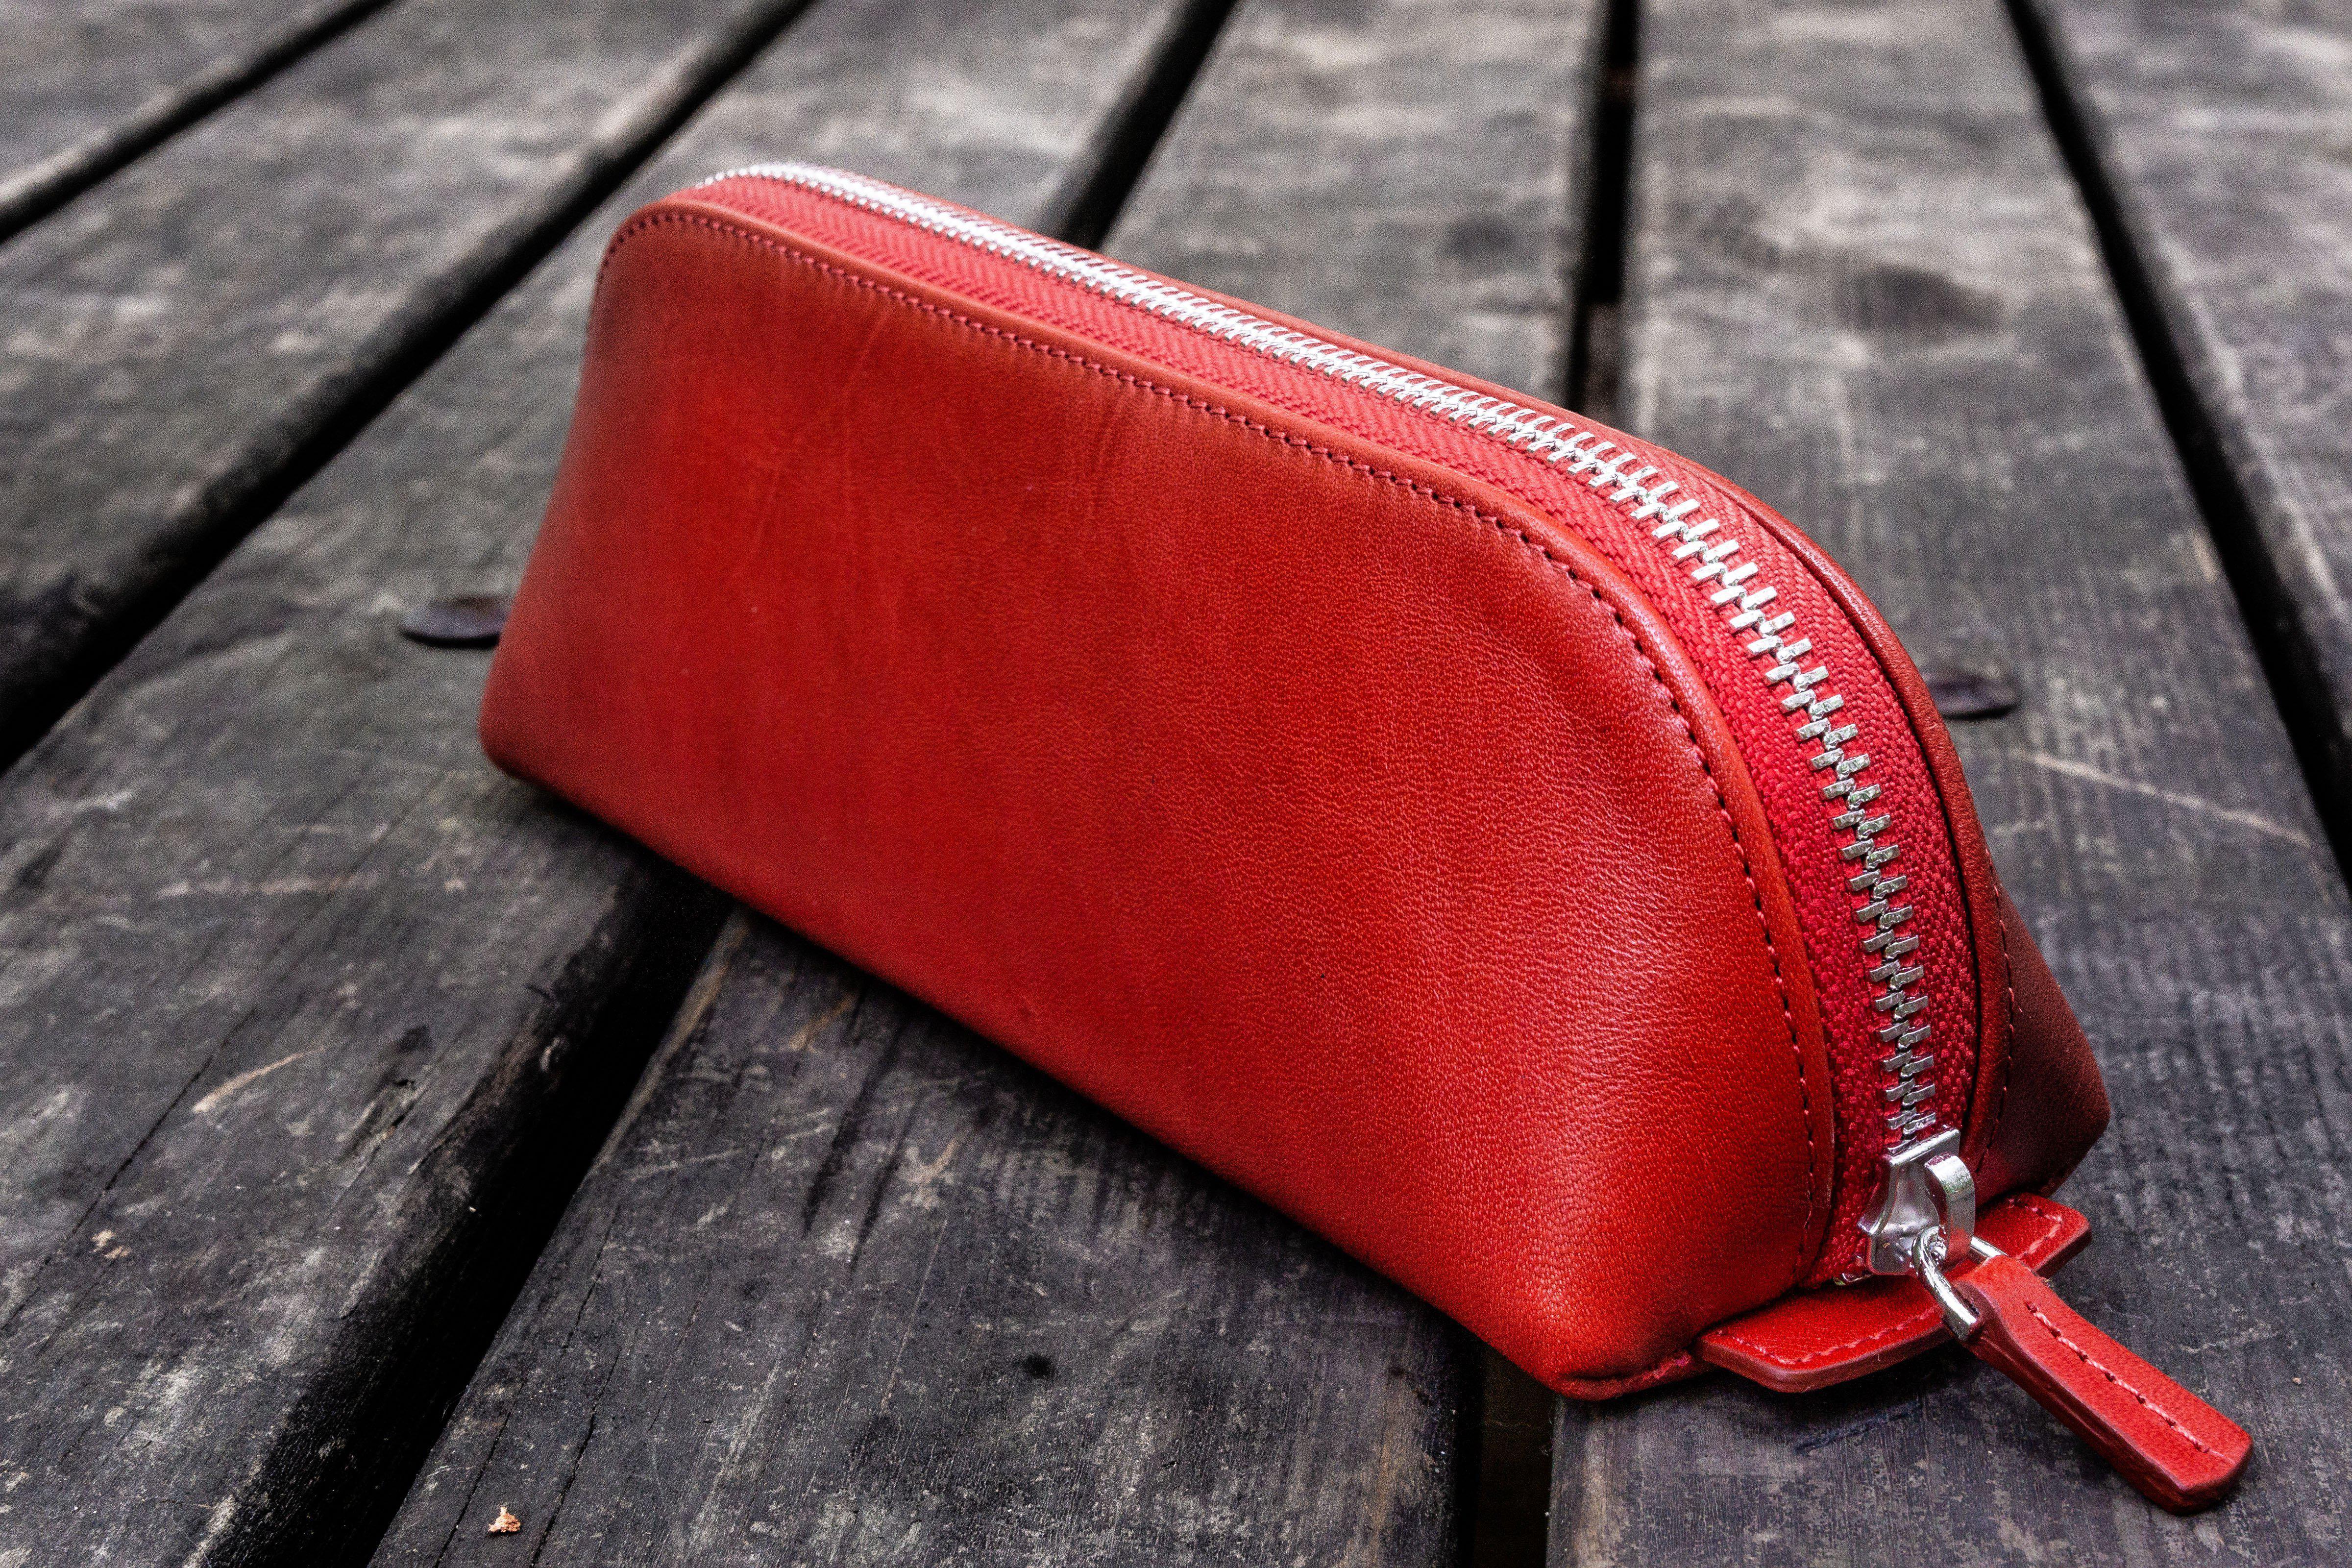 XLarge Zipper Leather Pencil Case - Red